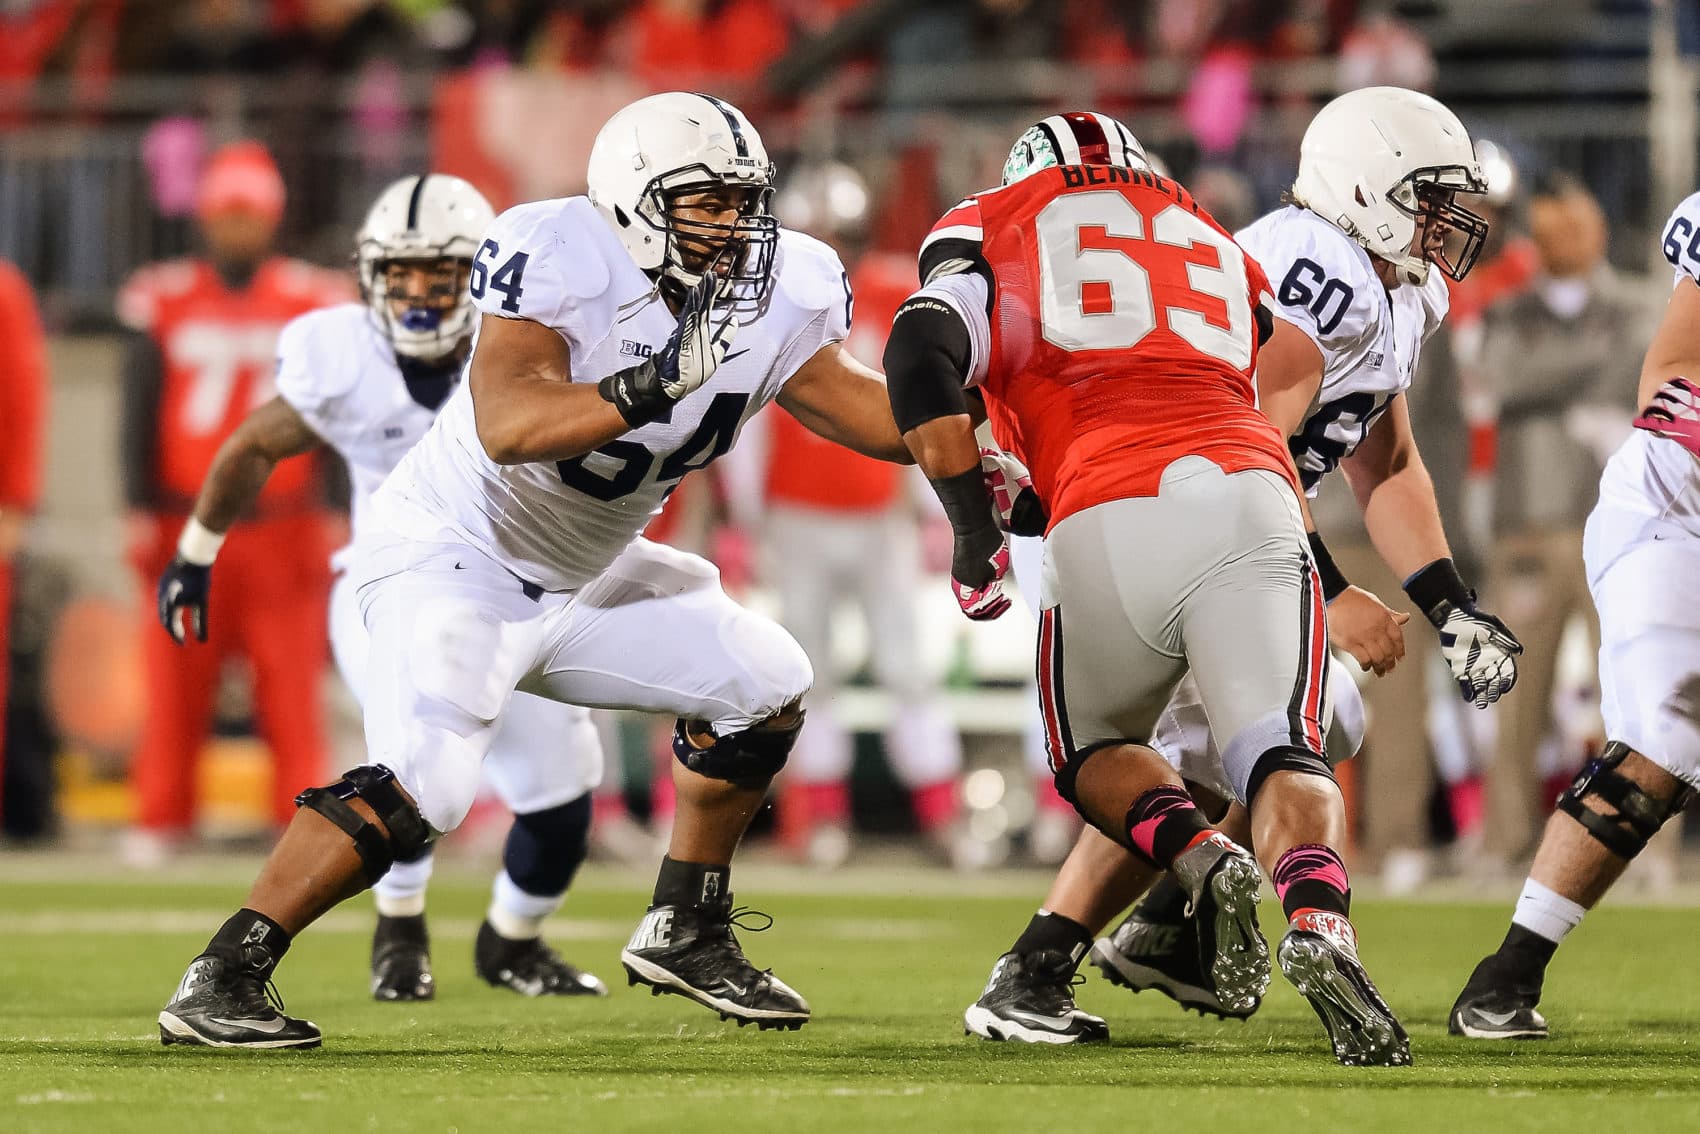 John Urschel (64) playing for Penn State in 2013. (Jamie Sabau/Getty Images)